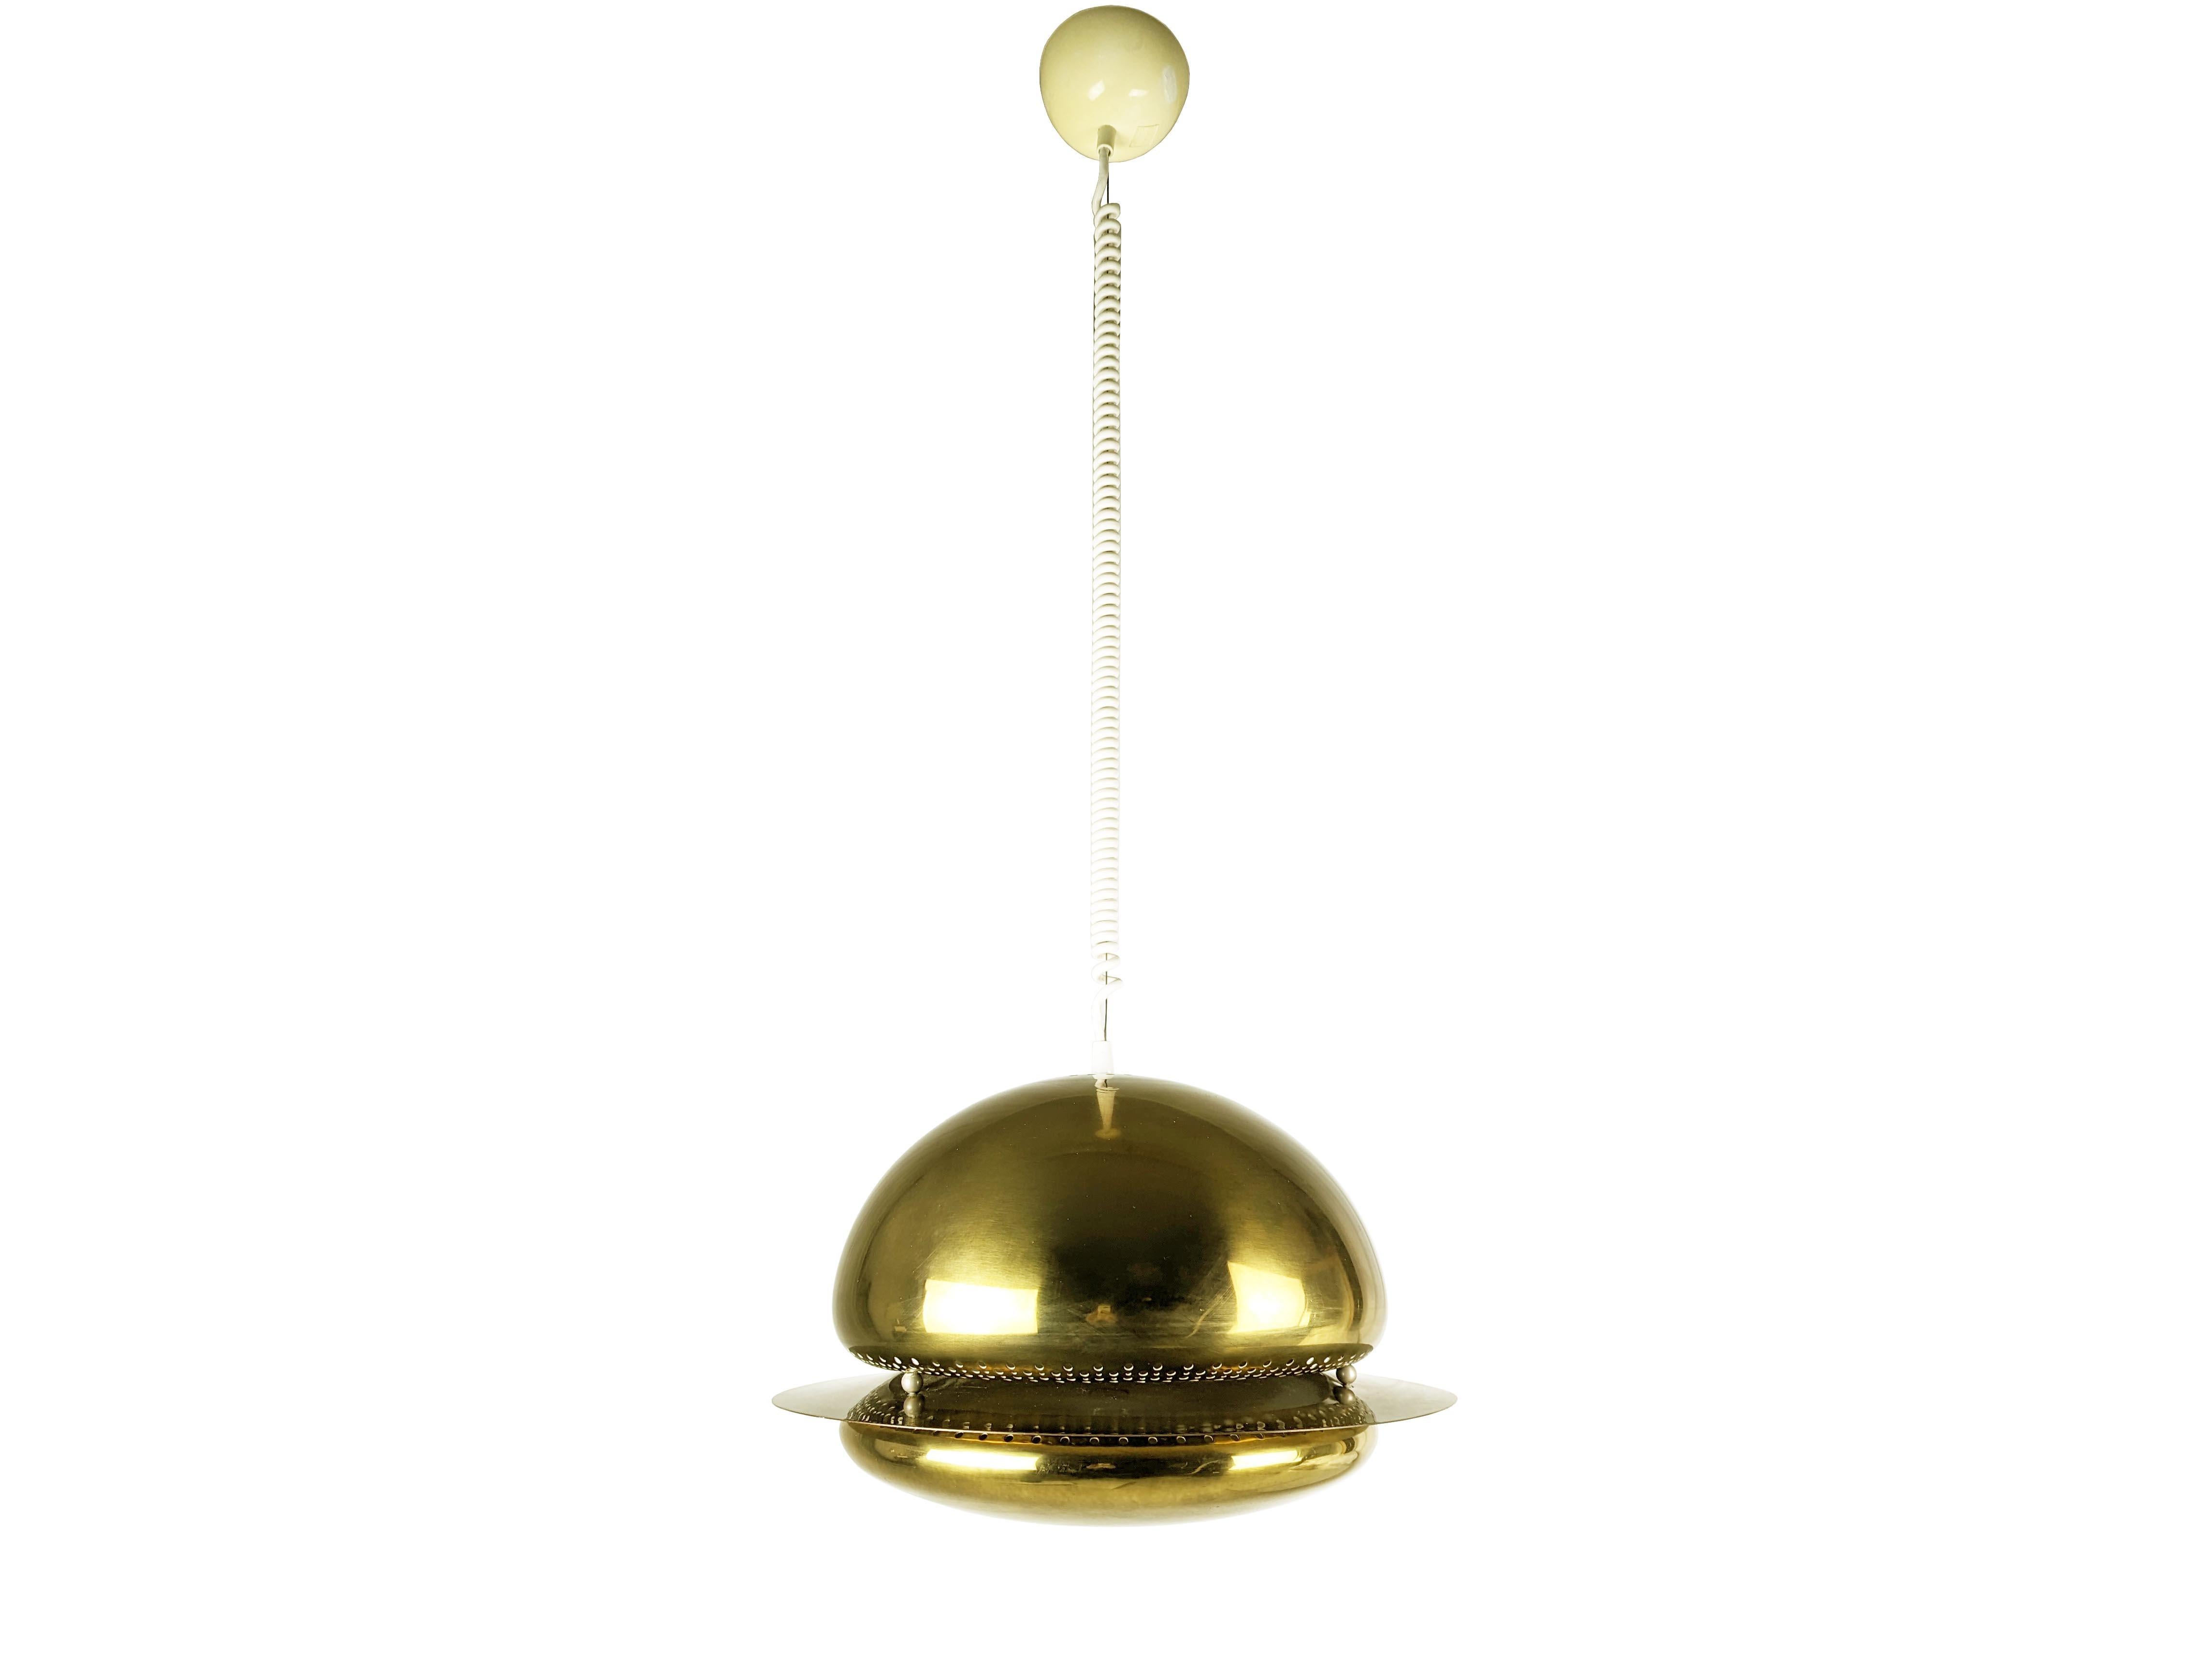 Golden Metal, brass and optical glass  Nictea pendant by afra e Tobia Scarpa for Flos. Very good condition: normal and pleasant oxidation patina as showed in pictures. All parts including electrical system are authentic.
Overall height is 115 cm but